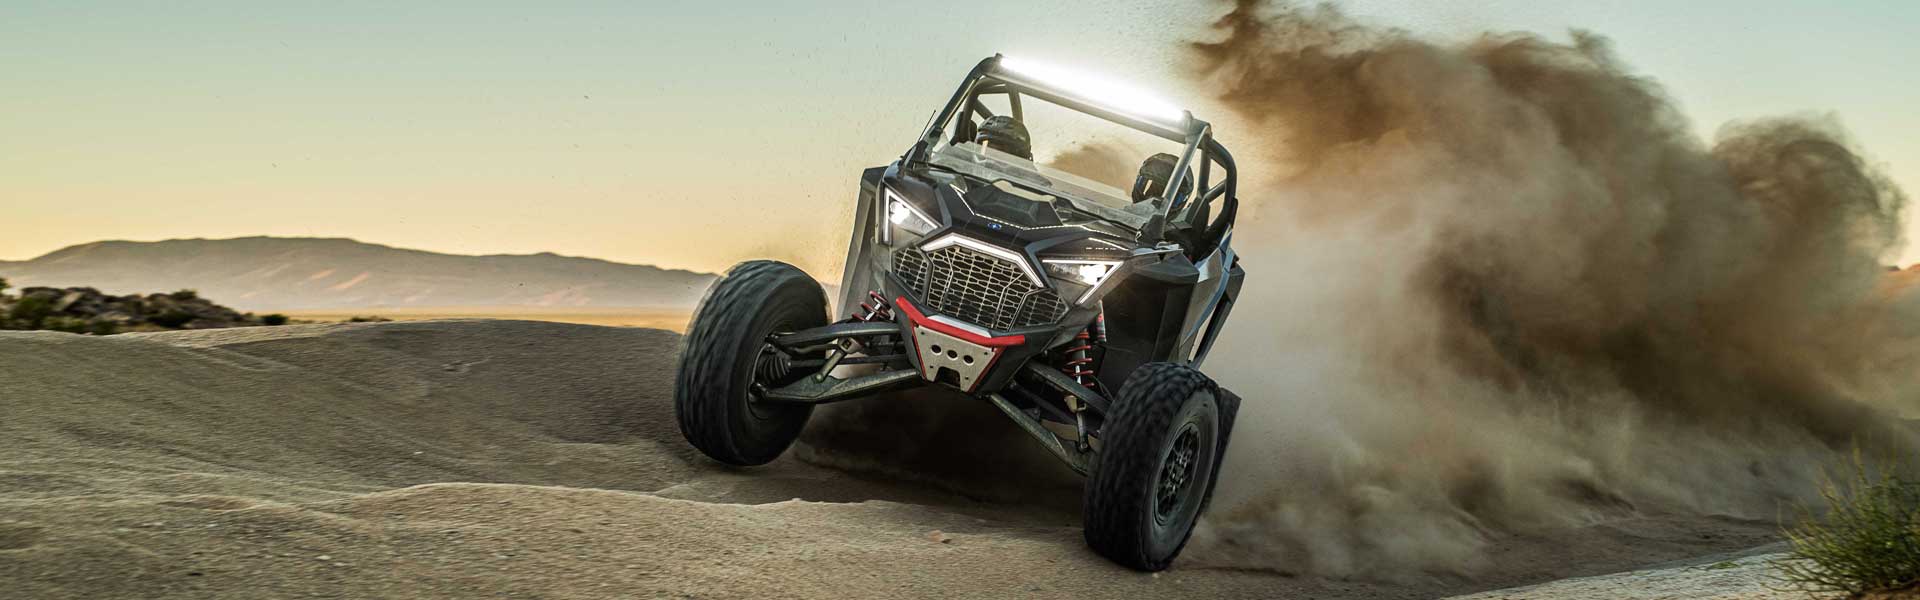 Rzr PRO R Ultimate EPS